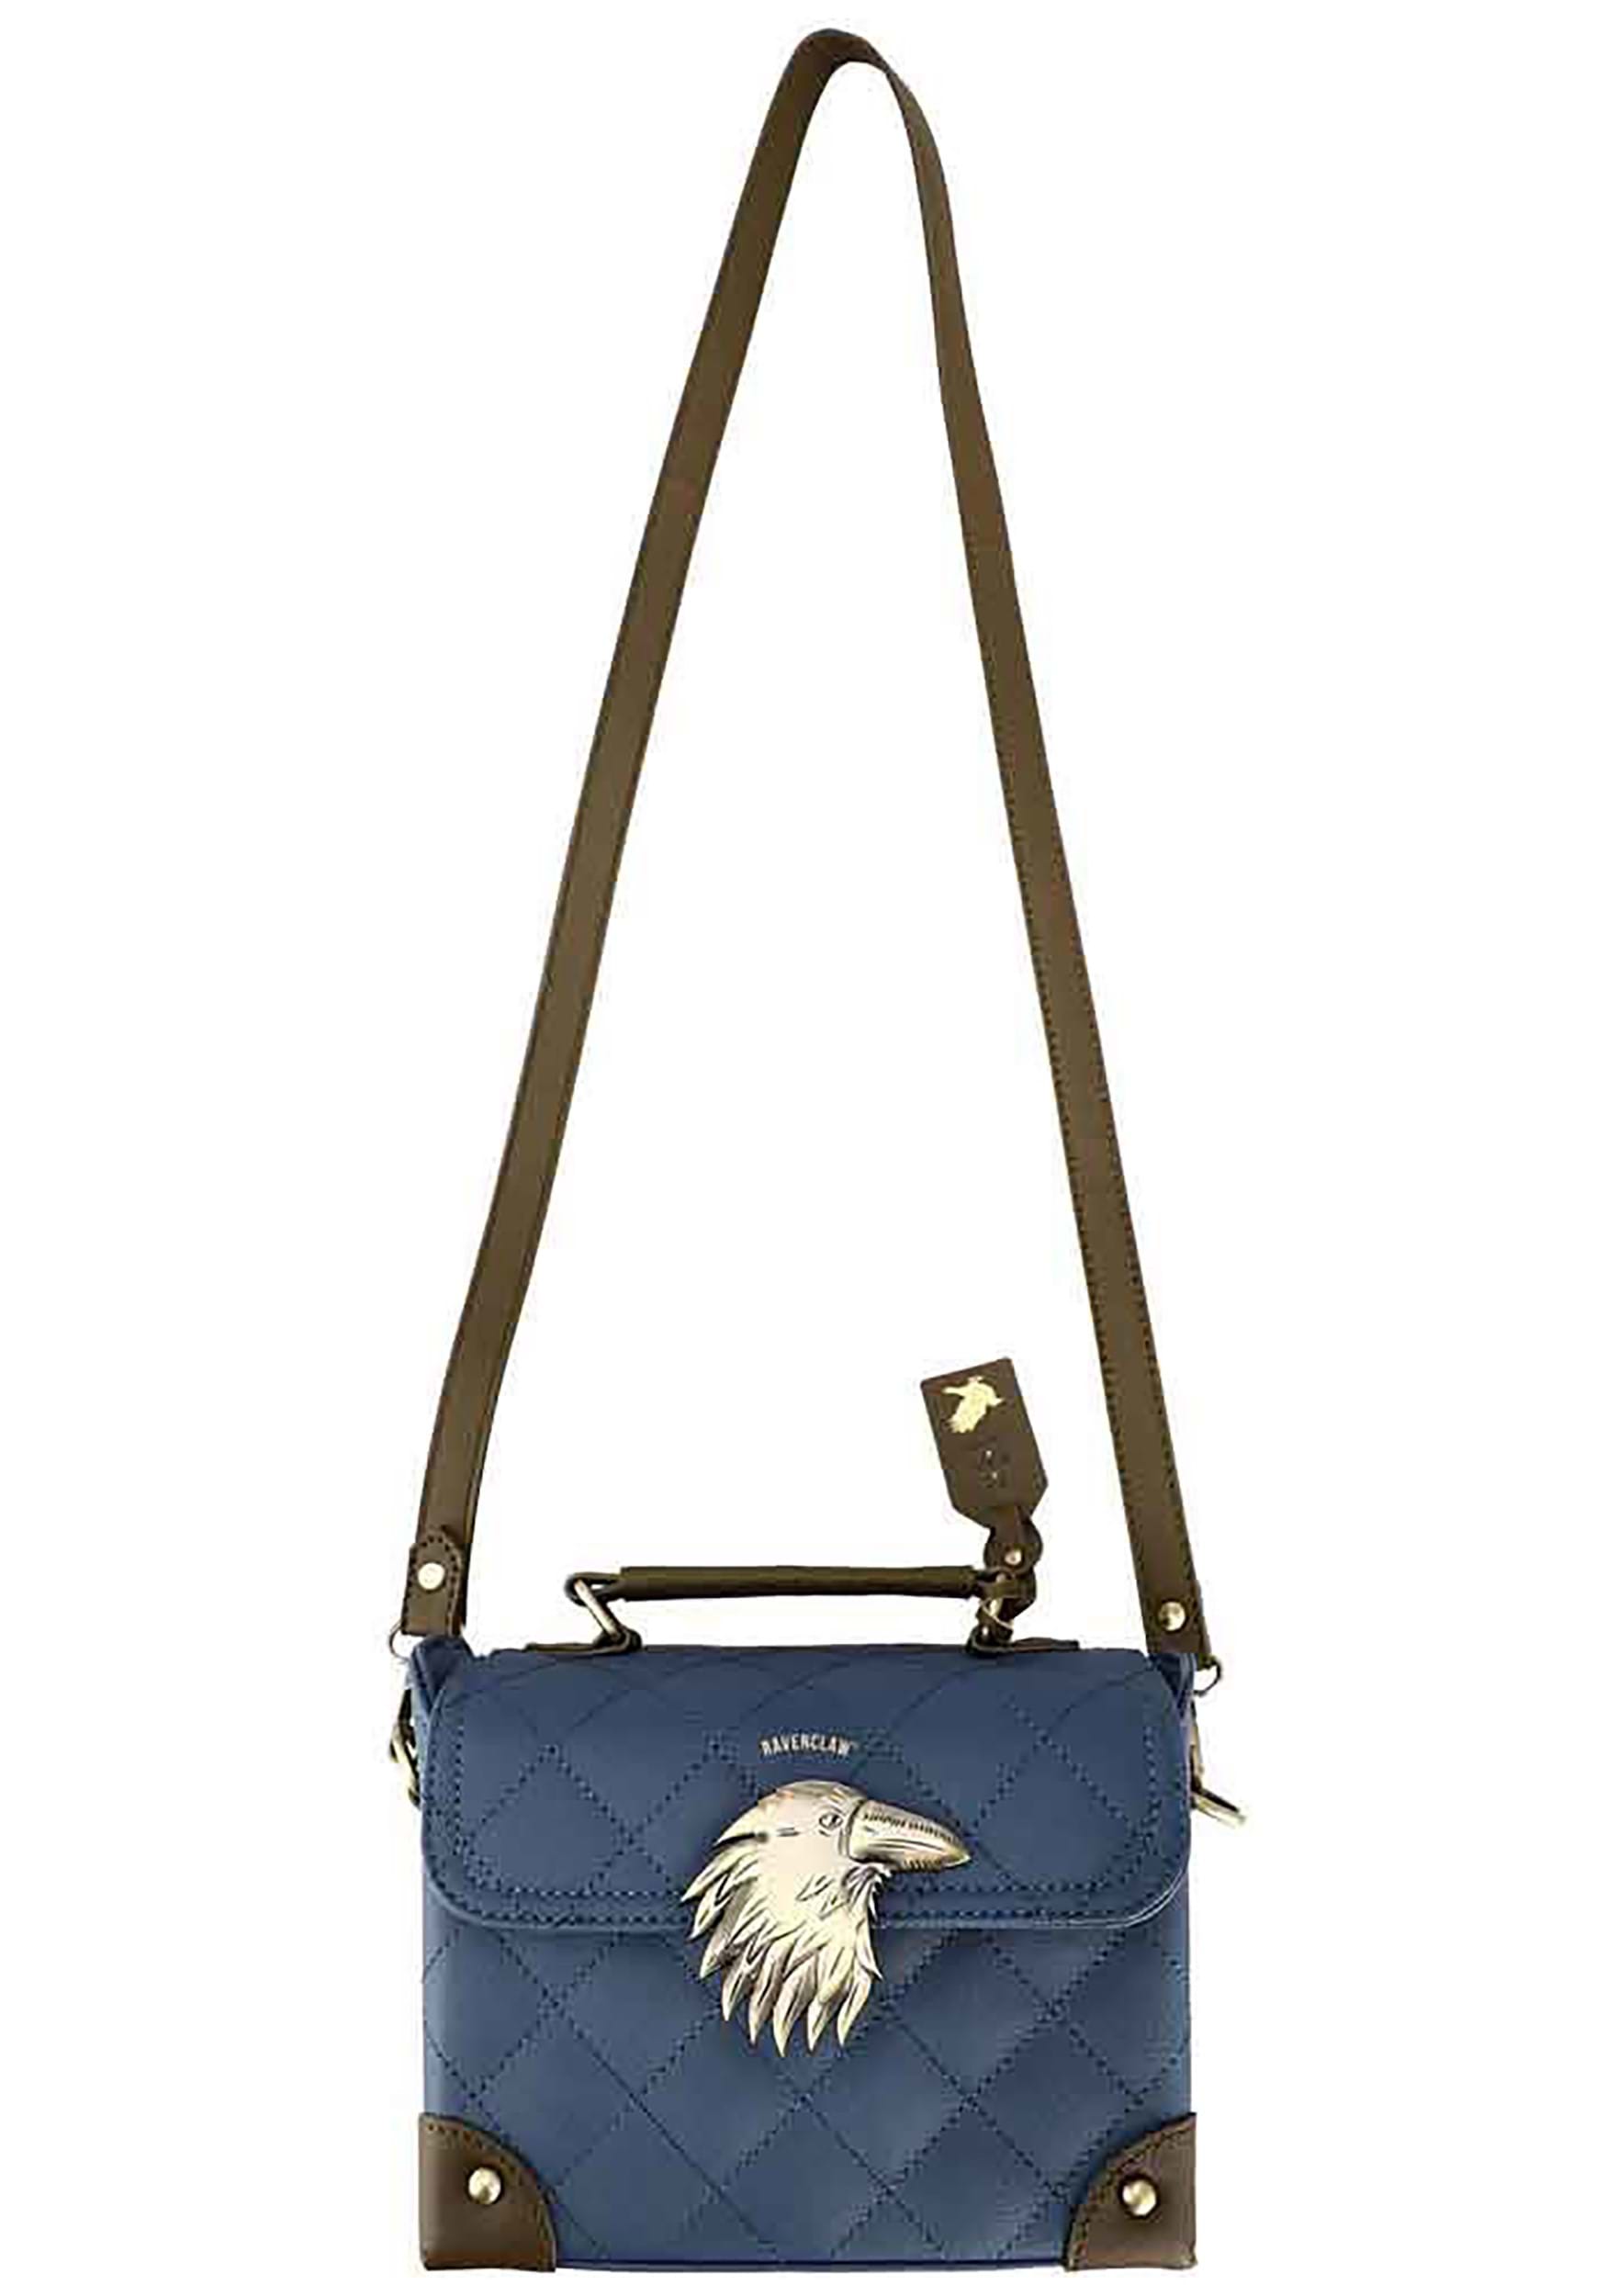 Loungefly Harry Potter Ravenclaw Chain Crossbody Bag